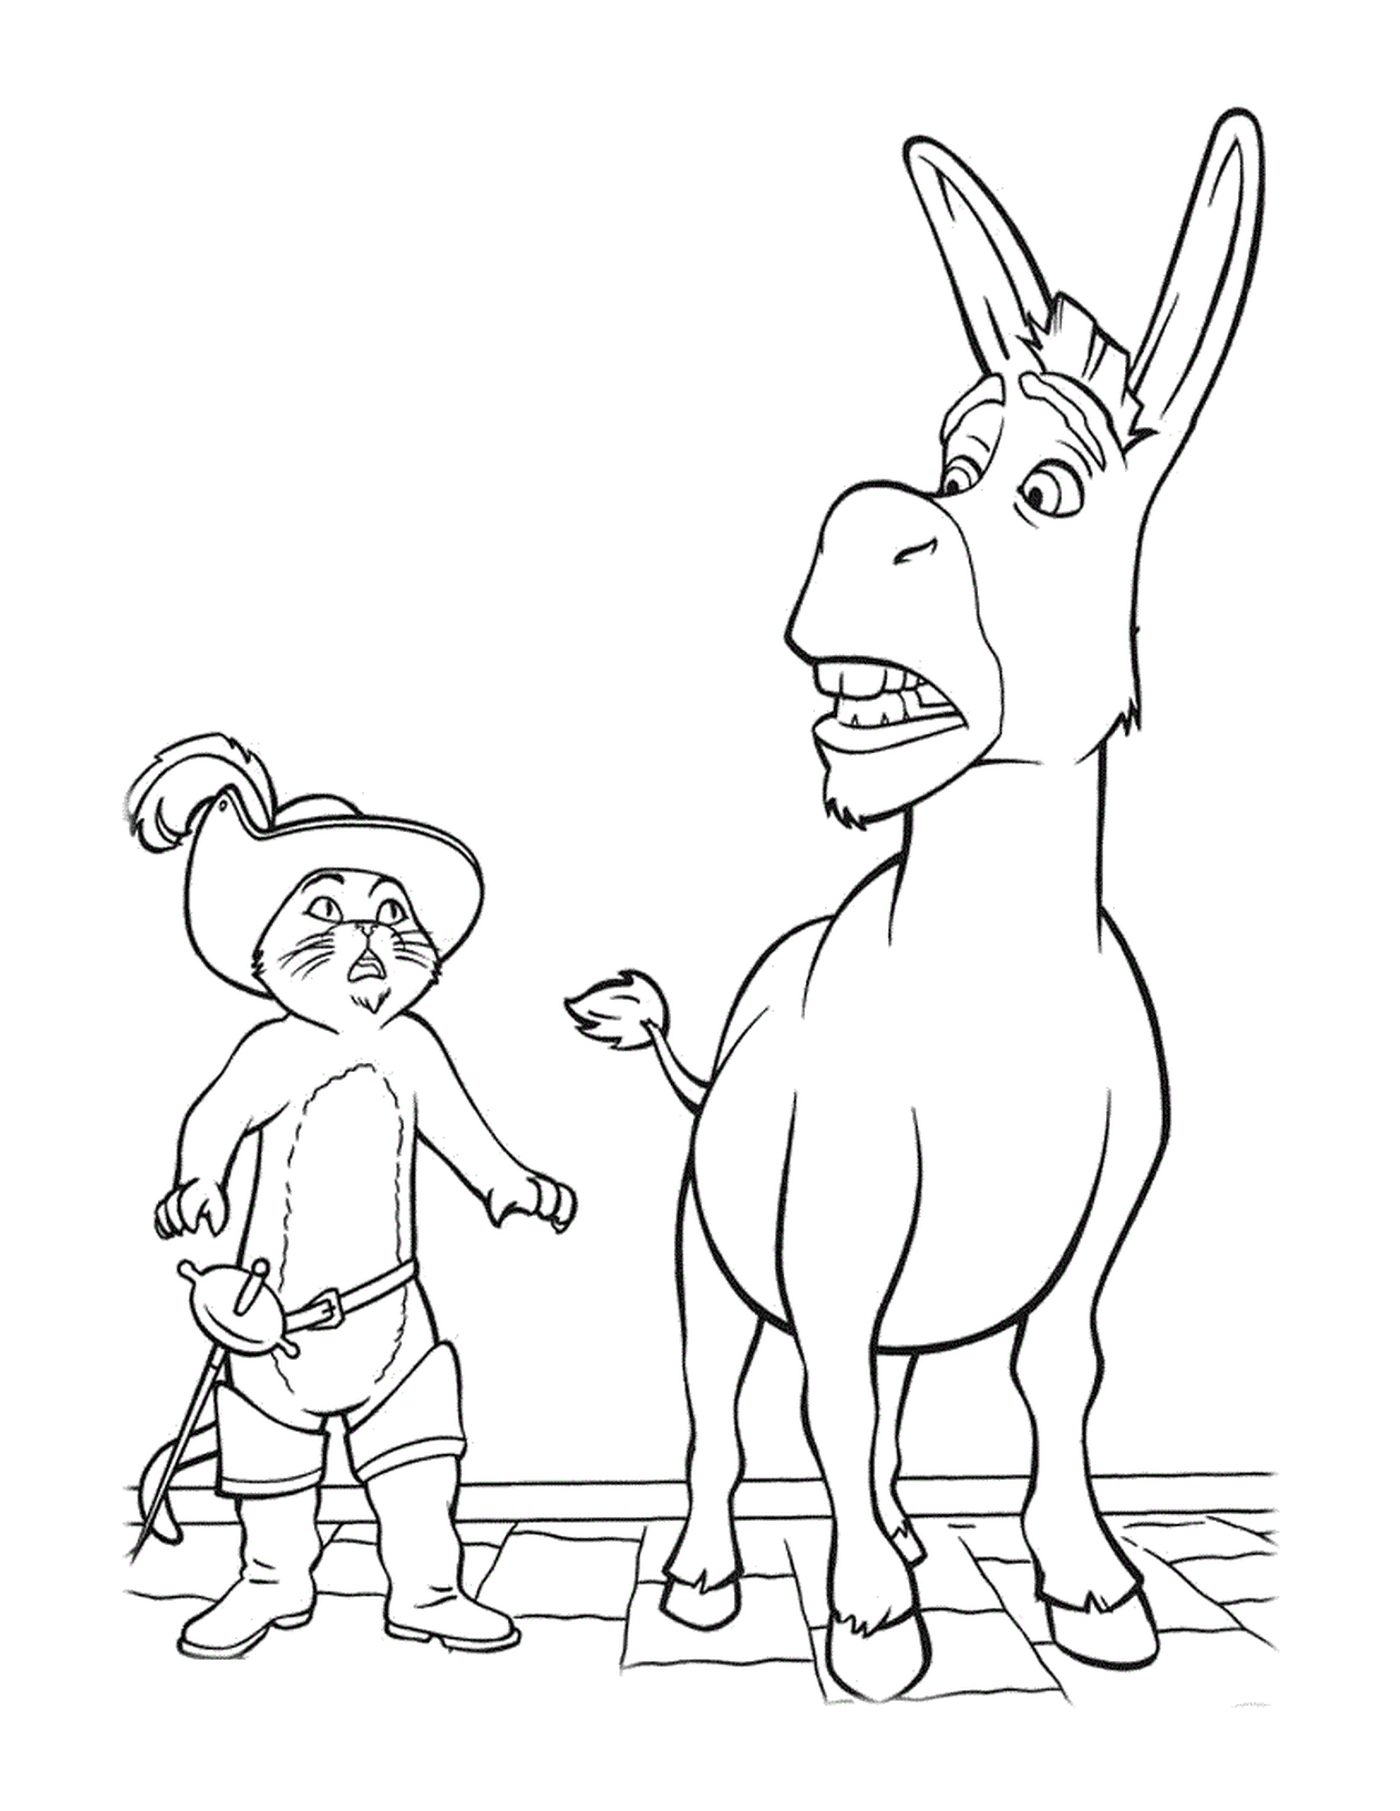  An adult of a donkey and a child 